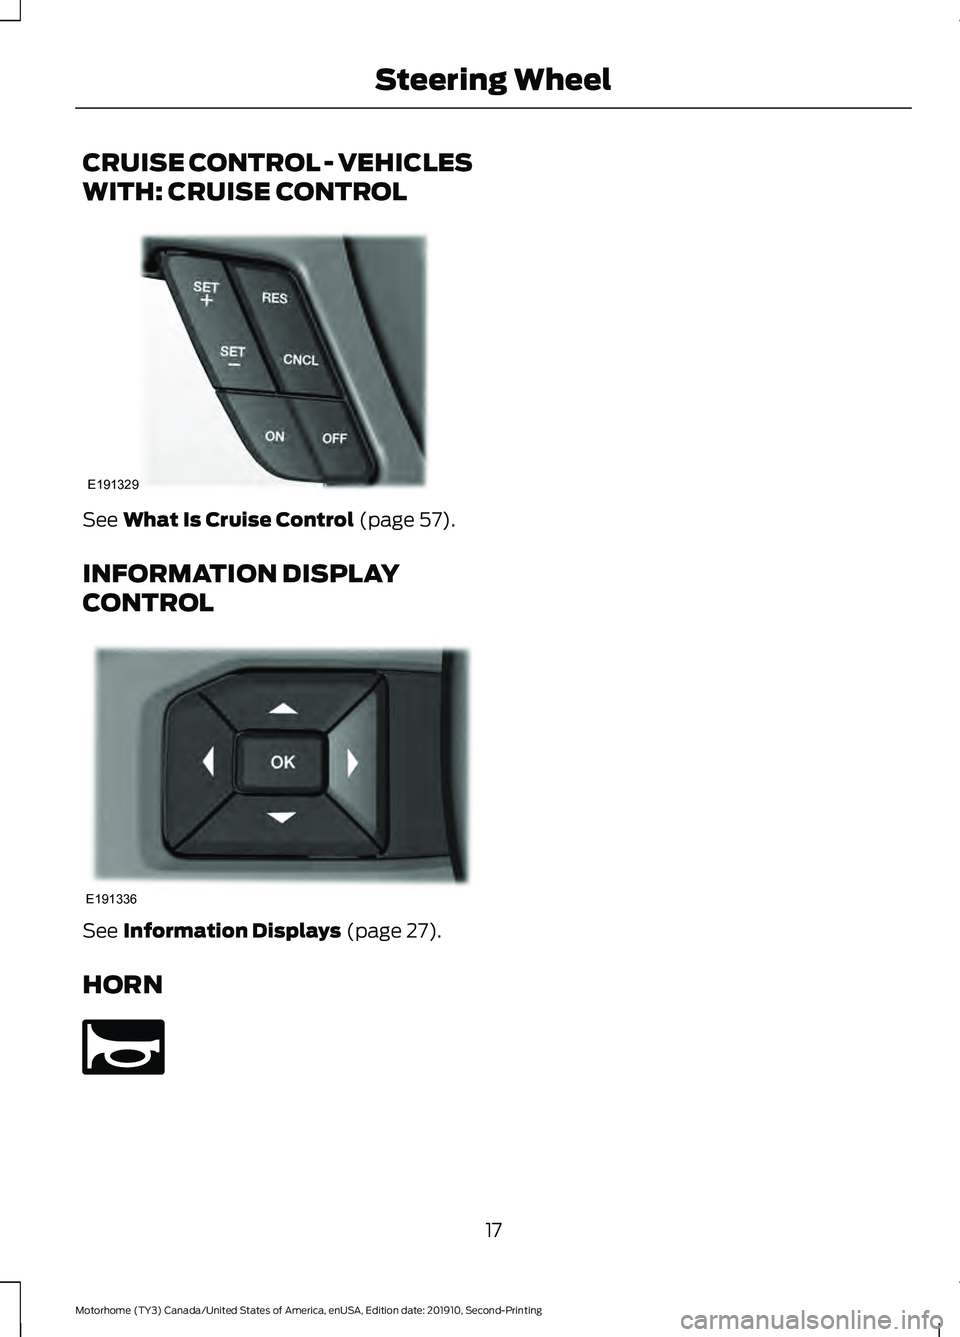 FORD F-59 2020 User Guide CRUISE CONTROL - VEHICLES
WITH: CRUISE CONTROL
See What Is Cruise Control (page 57).
INFORMATION DISPLAY
CONTROL See 
Information Displays (page 27).
HORN 17
Motorhome (TY3) Canada/United States of Am